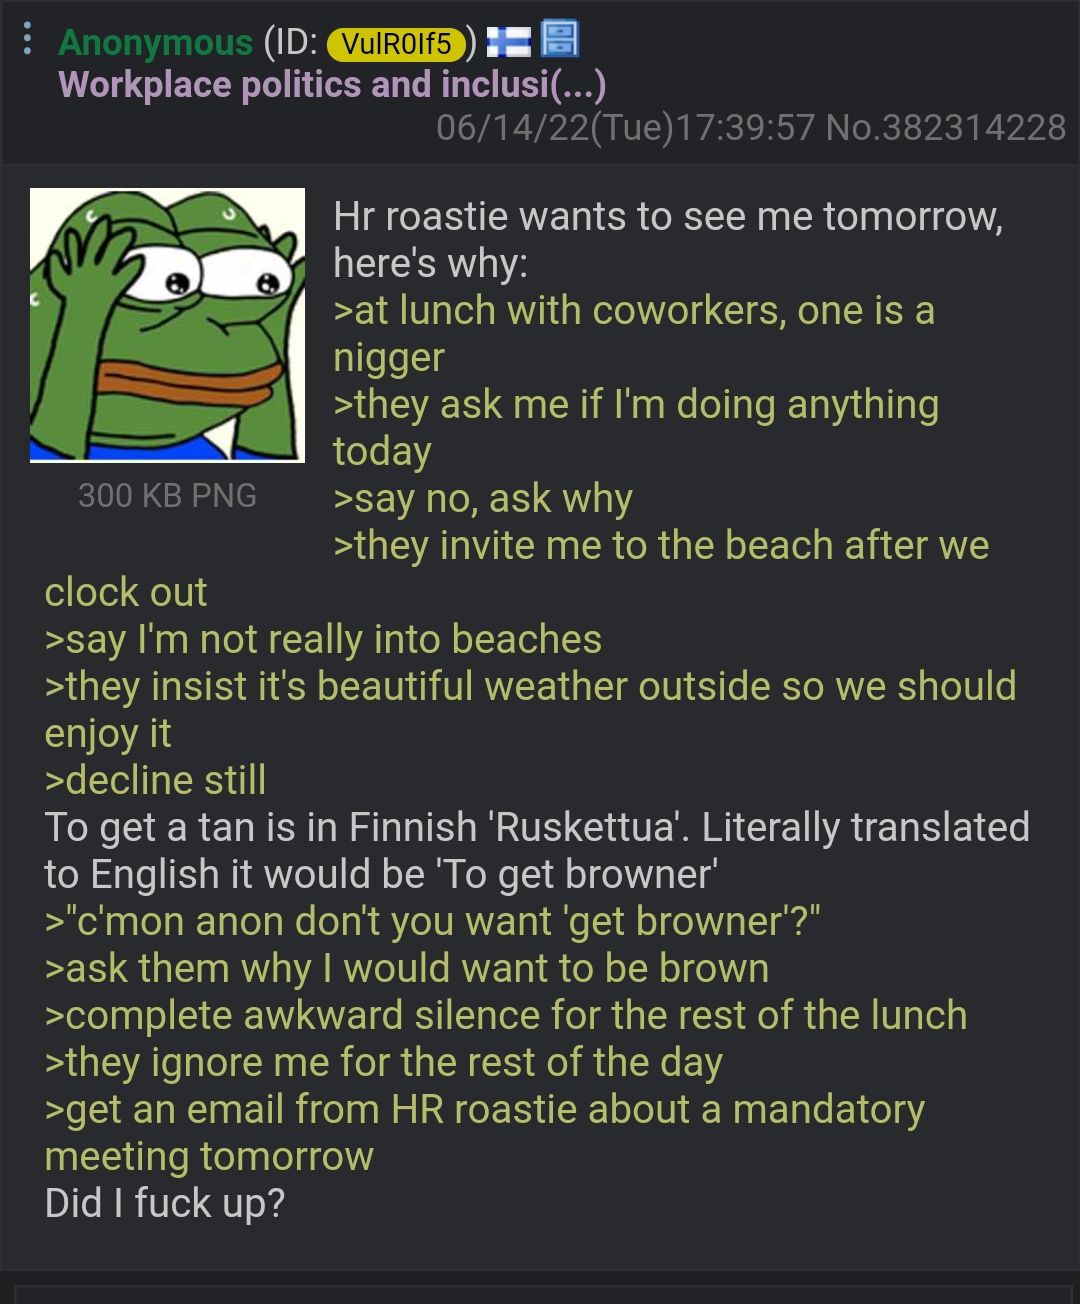 Anon is in trouble